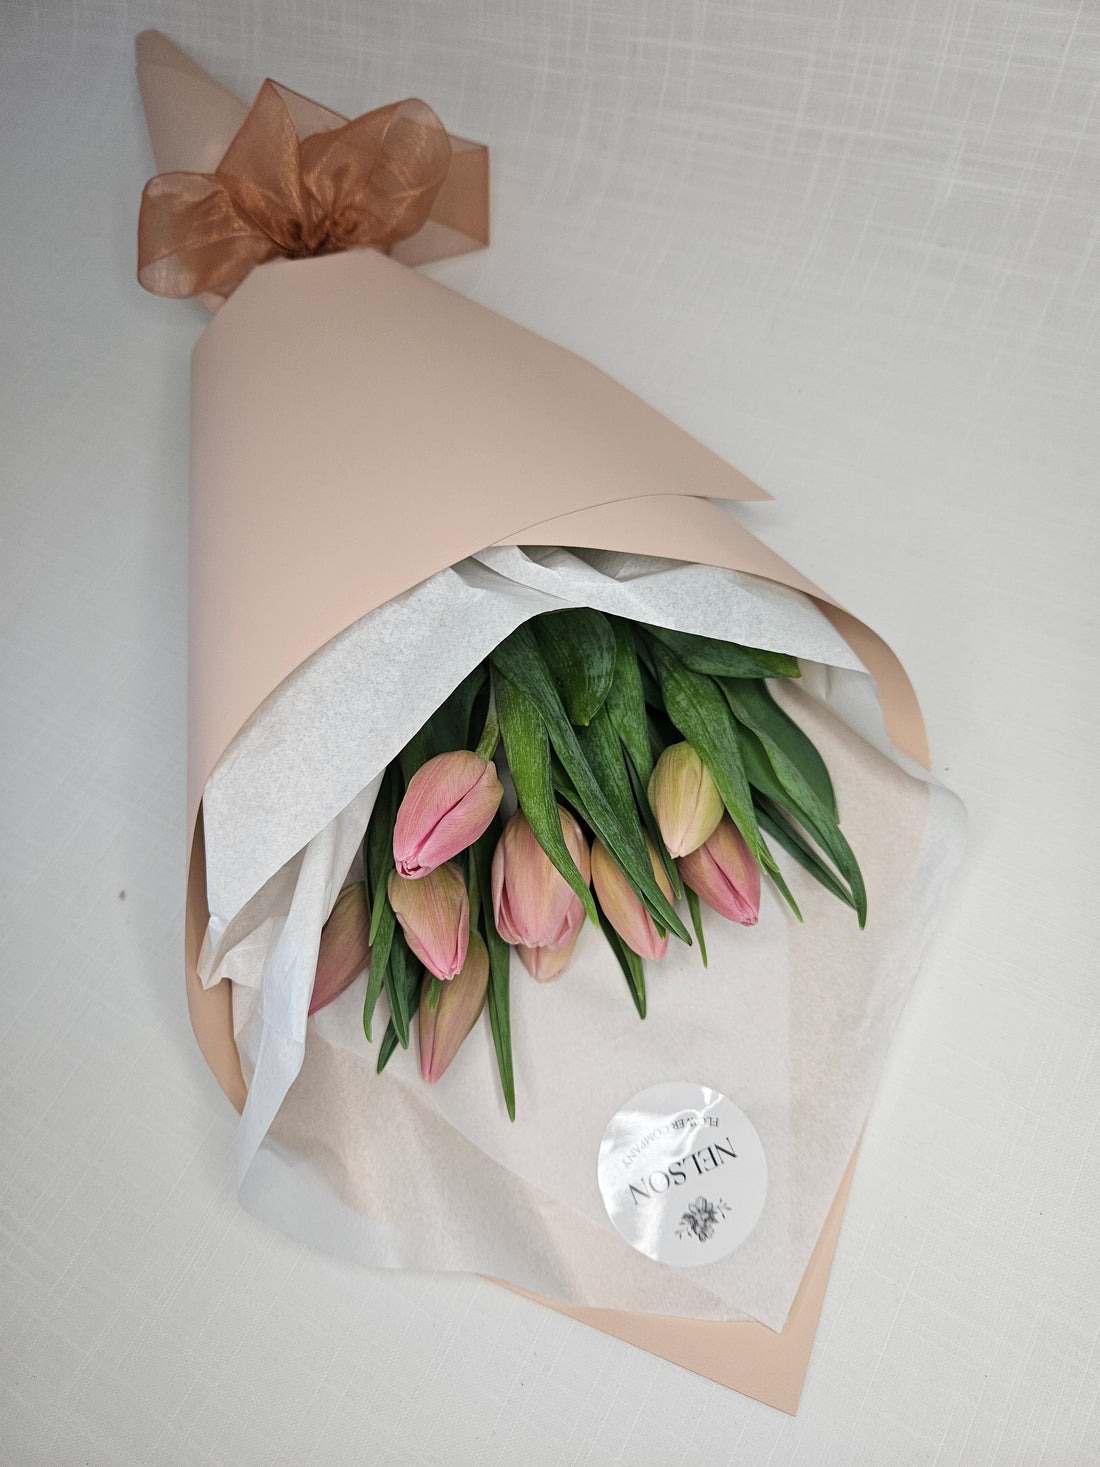 Soft pink Market Tulips wrapped in champagne rose gold paper.